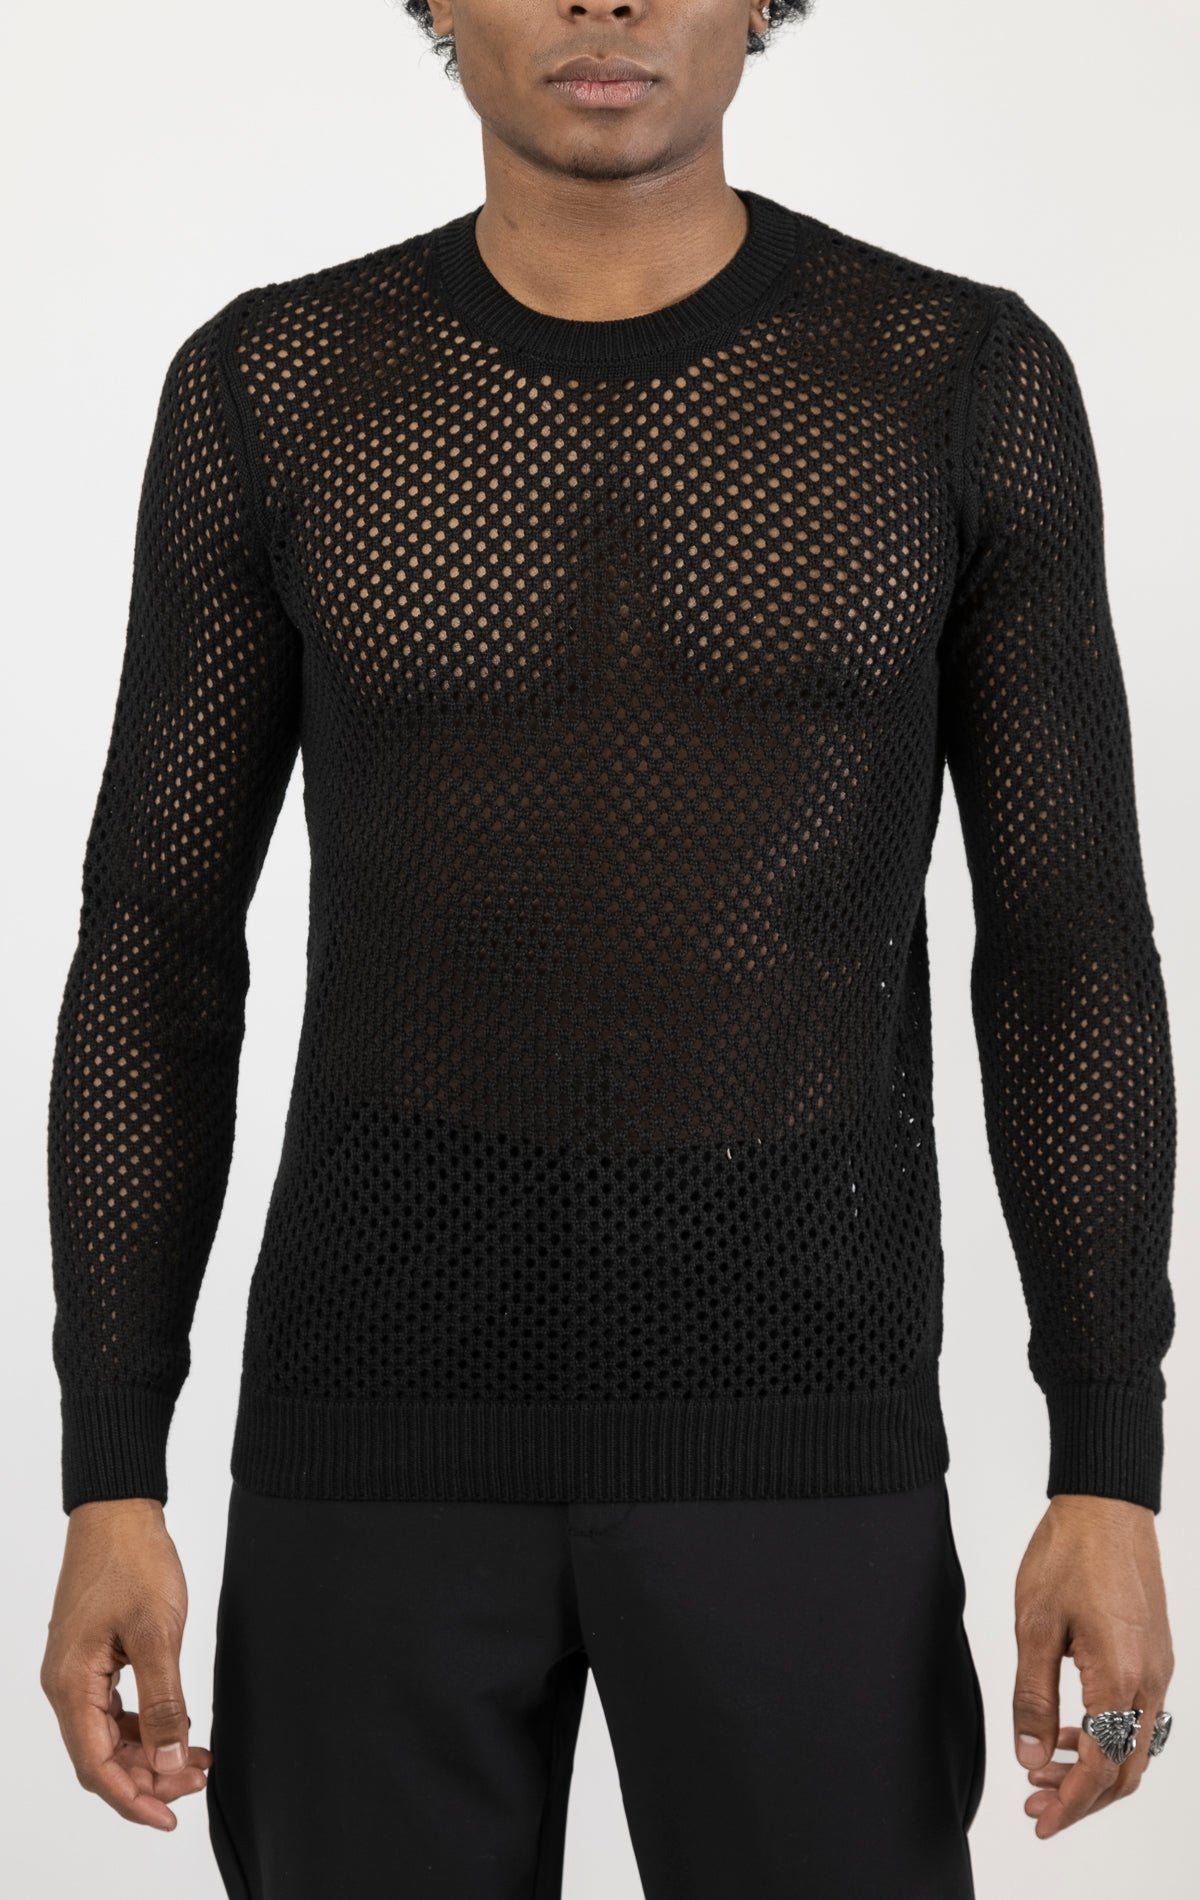 Men's see-through fishnet muscle fit shirt in black. The shirt is made from a 50% cotton, 50% acrylic blend and features a muscle fit silhouette with a see-through fishnet fabric design.